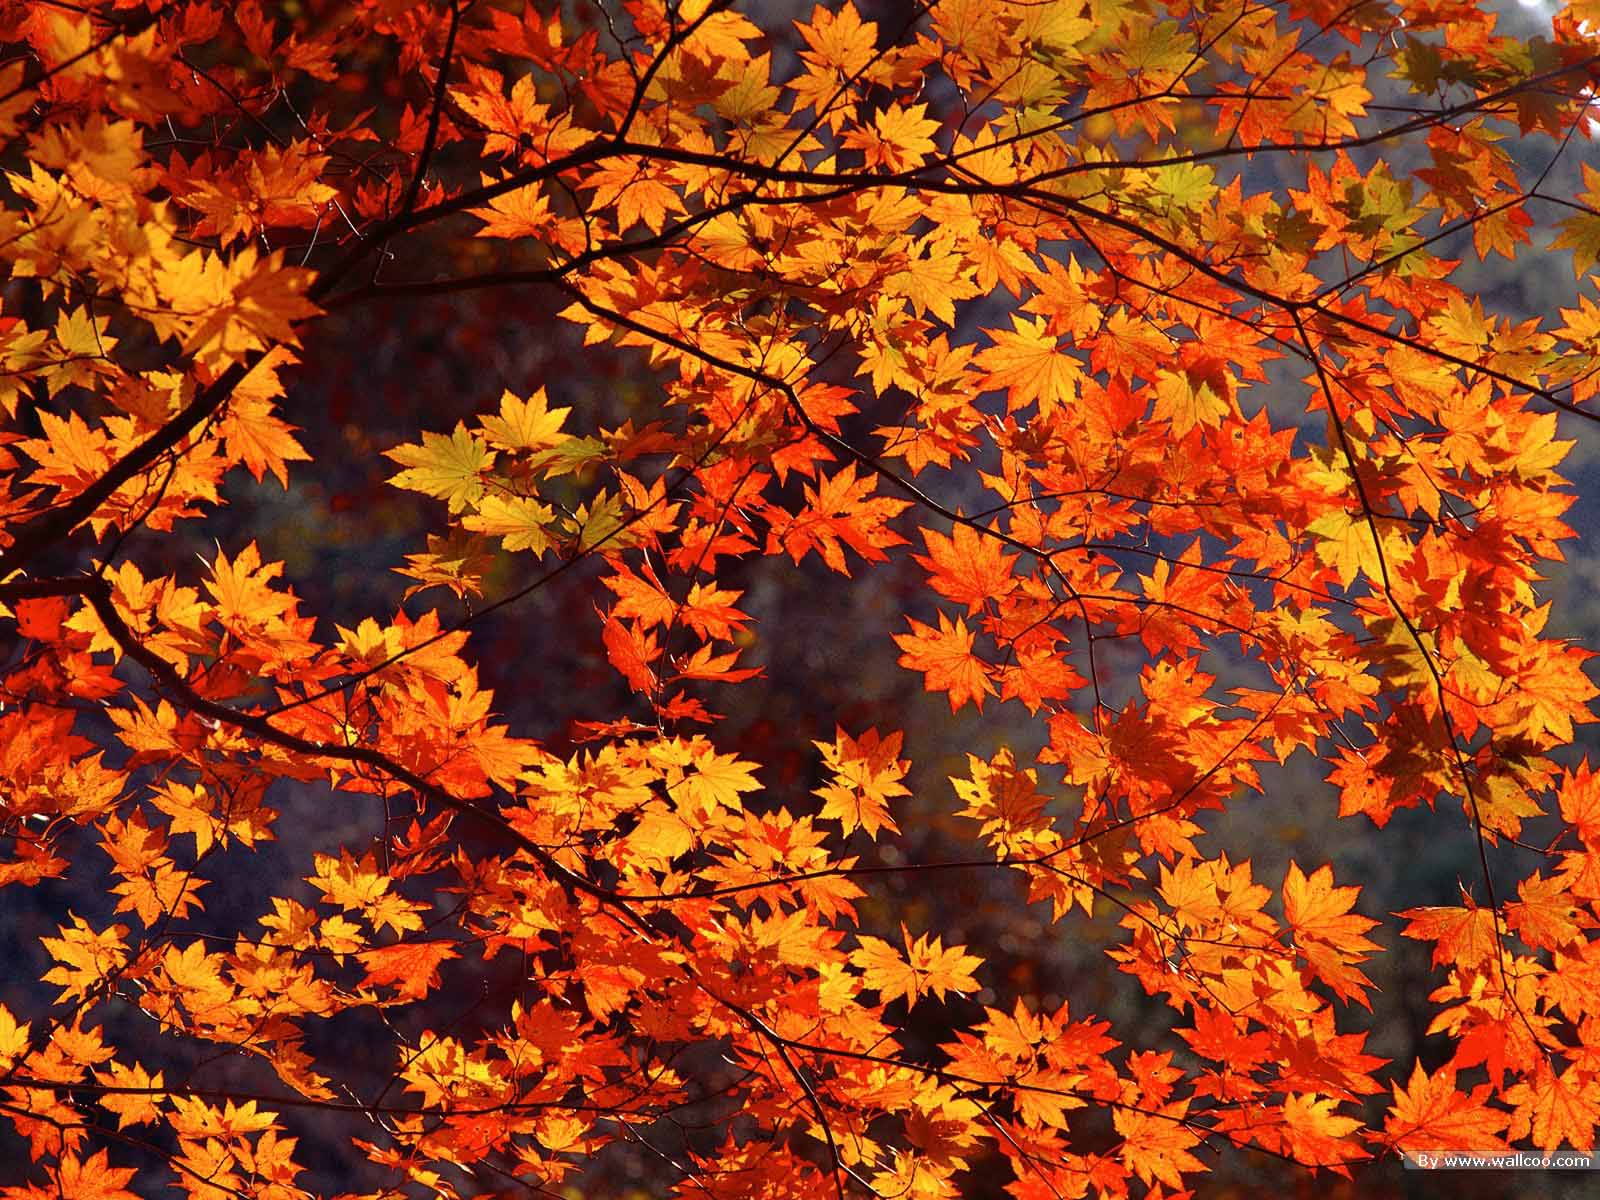 Android Fall Wallpapers